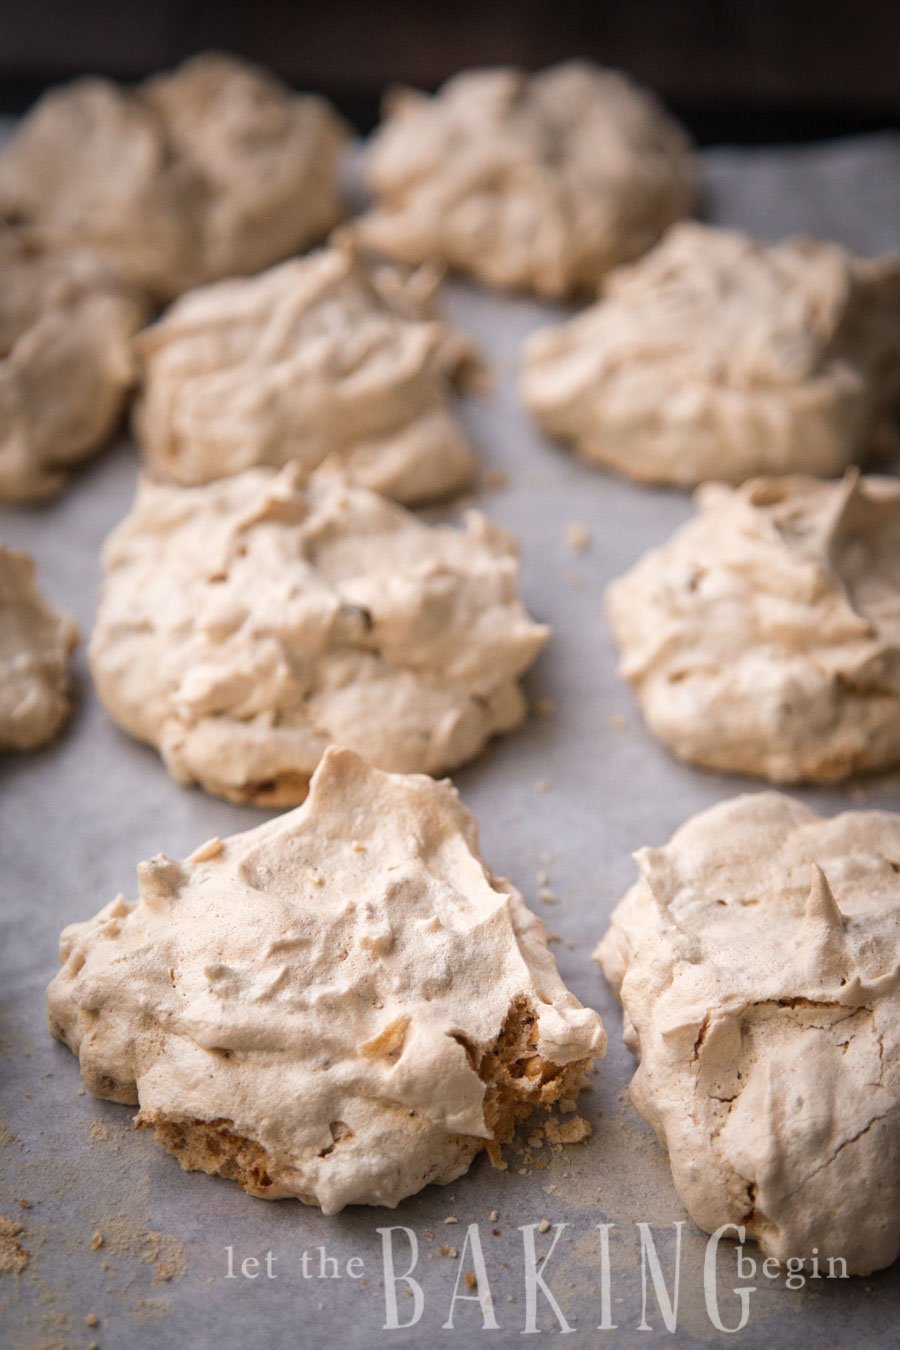 Hazelnut Meringue - Light, crispy and full of hazelnut flavor this meringue is perfect with a cup of tea or as part of a cake | Let the Baking Begin!